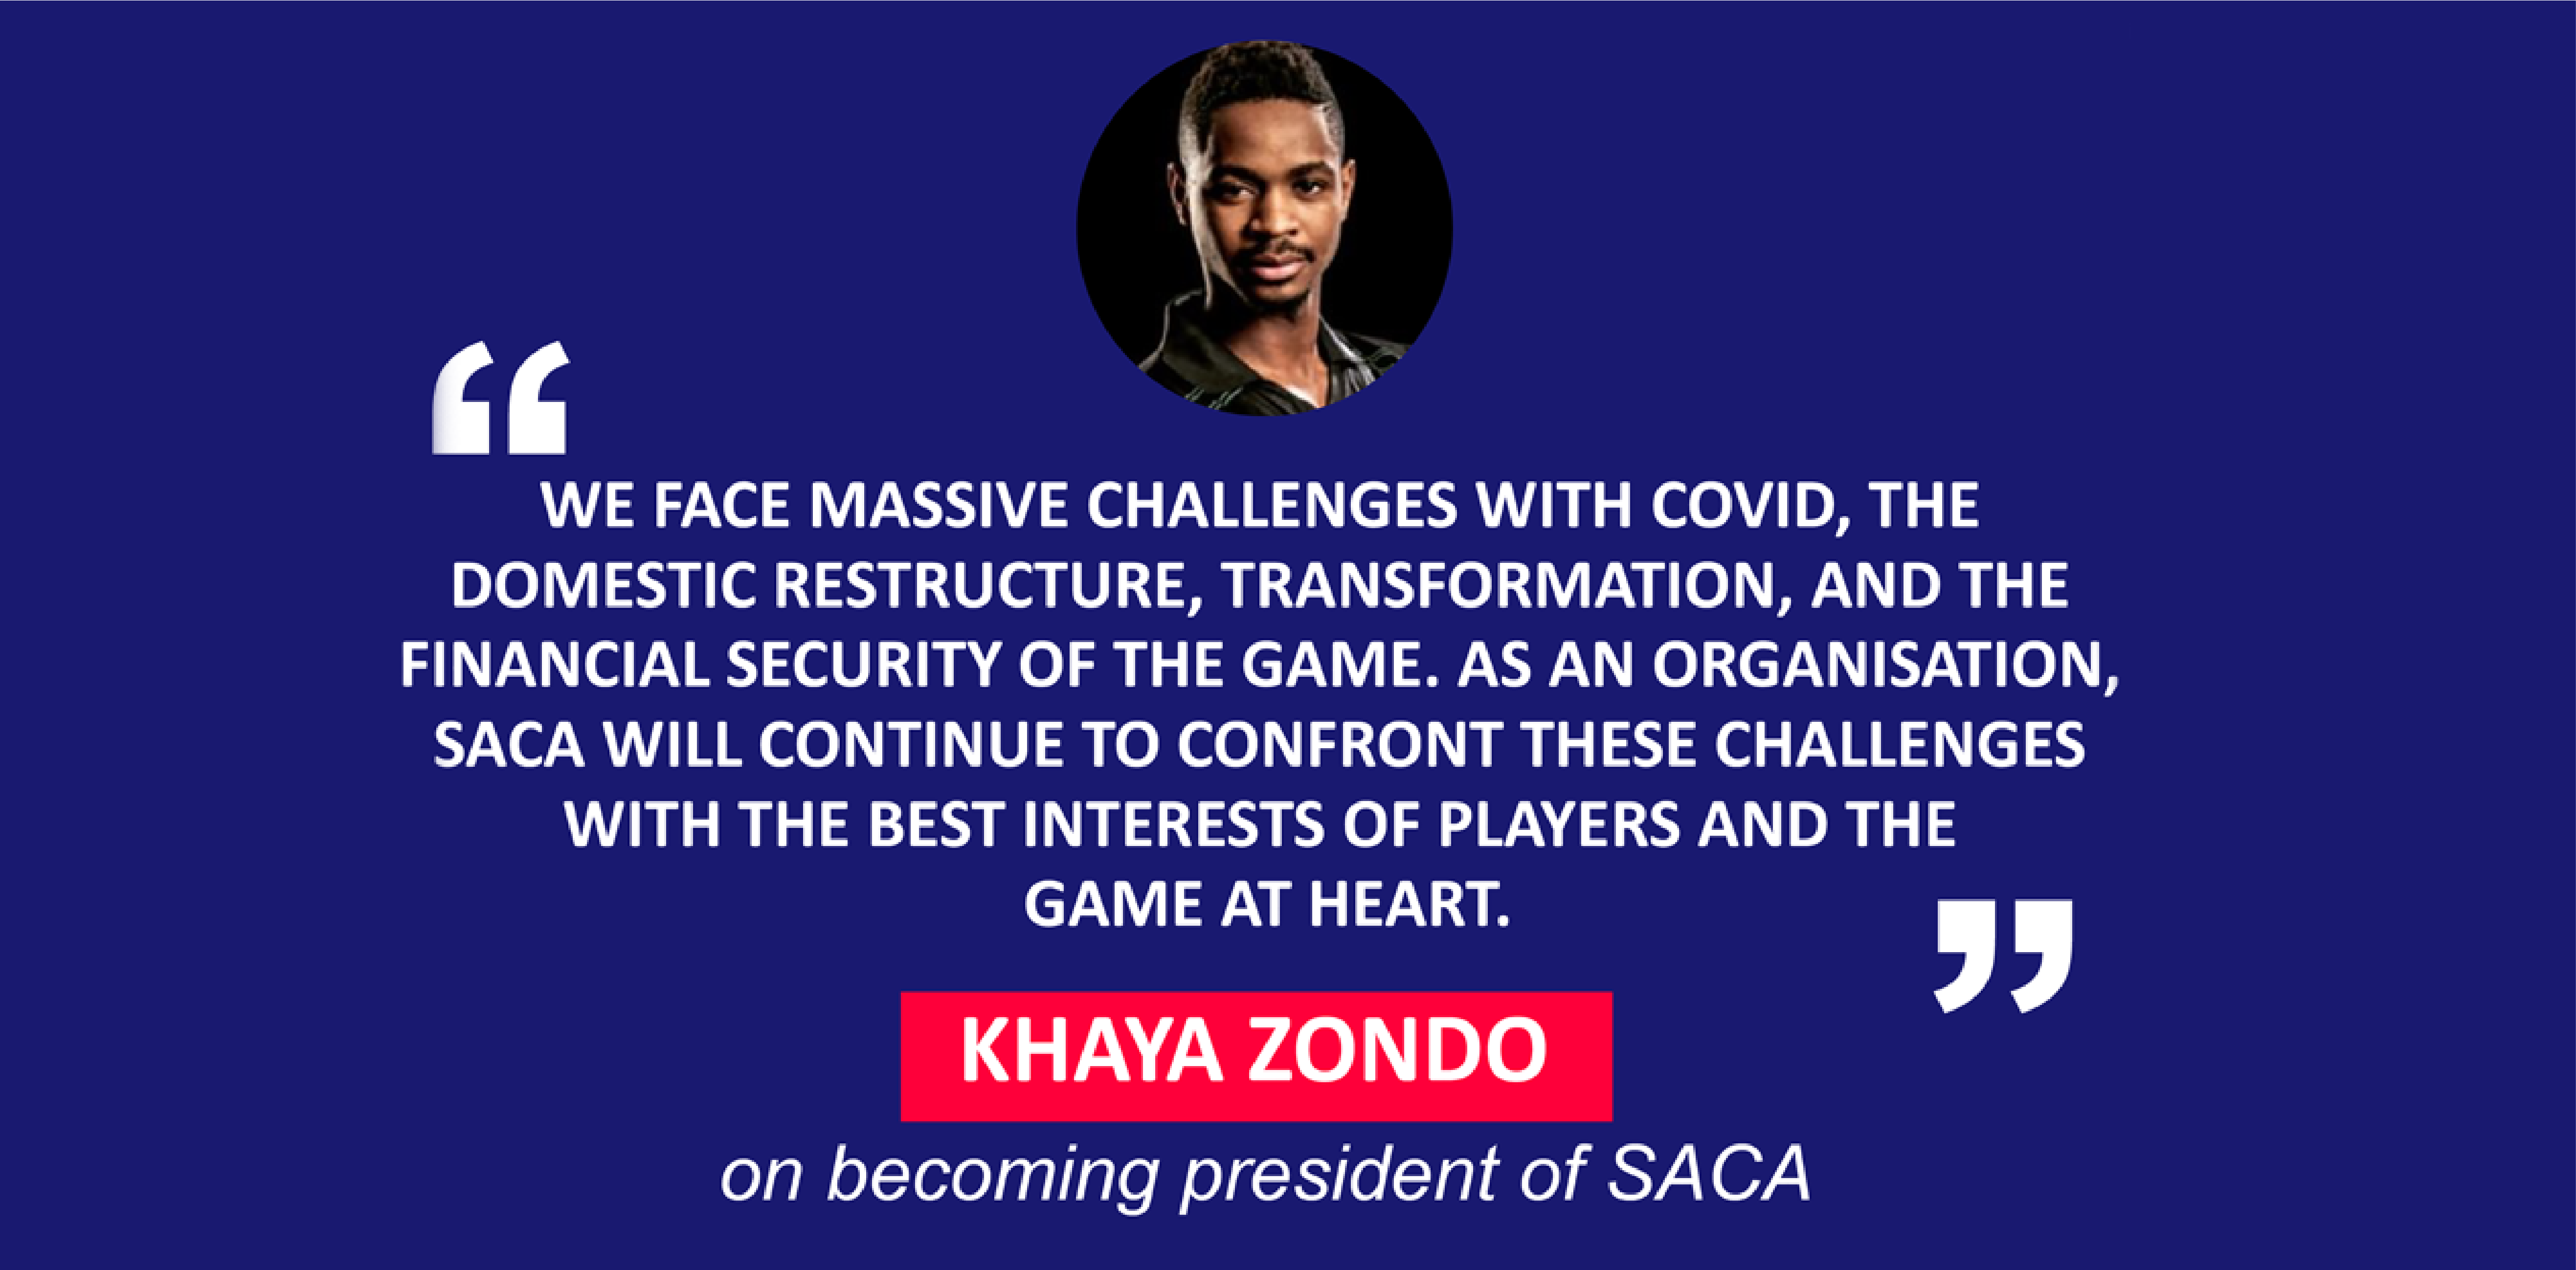 Khaya Zondo, President of South African Cricket Association on becoming president of SACA